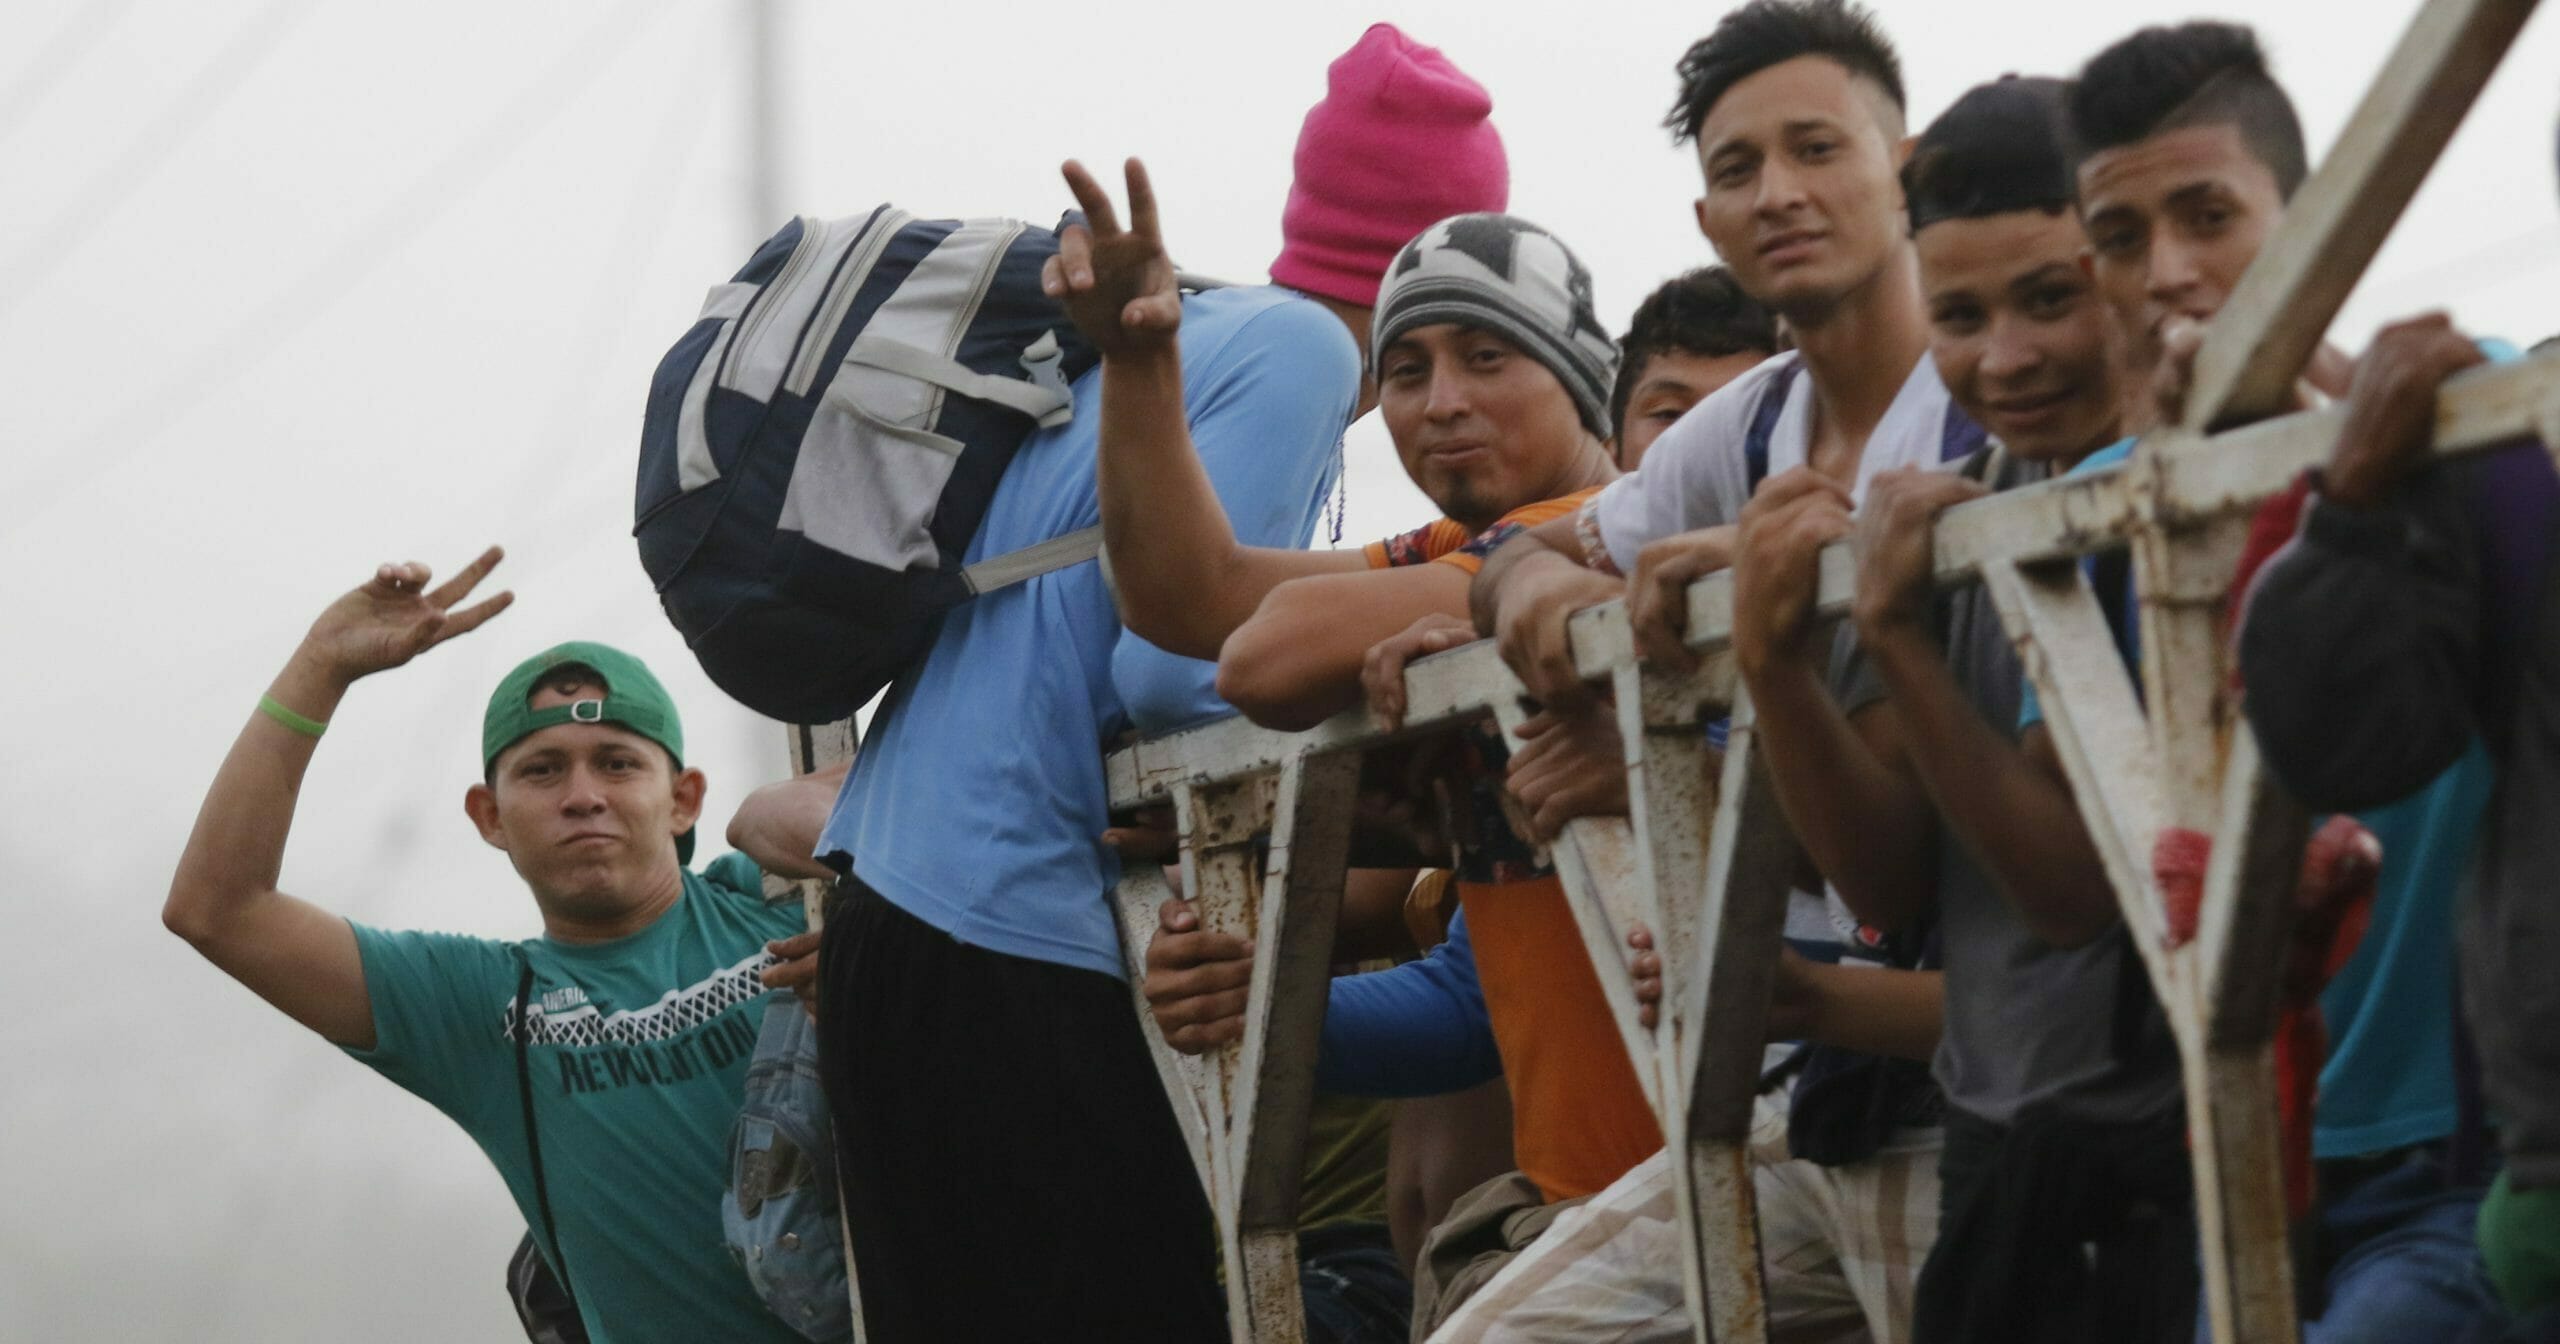 Migrants ride on top of a truck moving along the highway, in hopes of reaching the distant United States, from San Pedro Sula, Honduras, on Jan. 15, 2020. Hundreds of Honduran migrants started walking and hitching rides Wednesday from the city of San Pedro Sula, in a bid to form the kind of migrant caravan that reached the U.S. border in 2018.